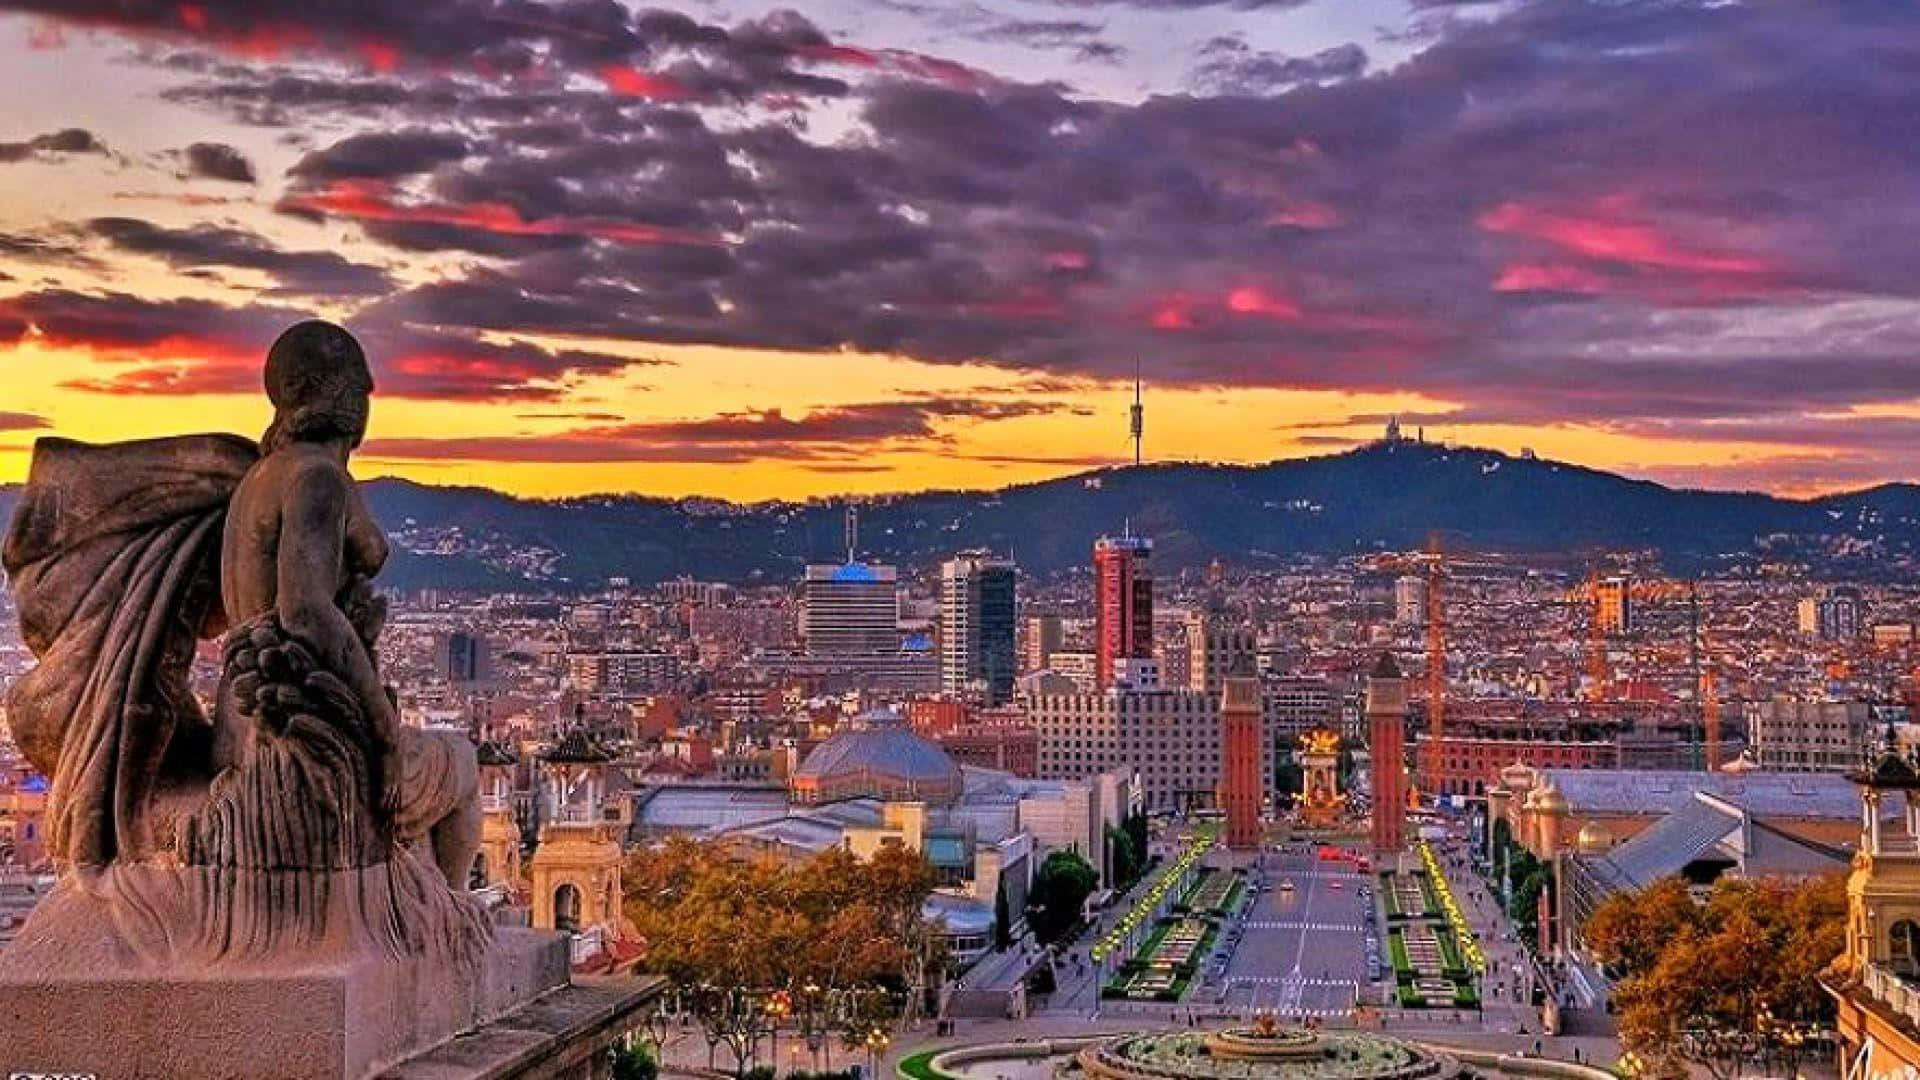 Aerial view of the iconic city of Barcelona